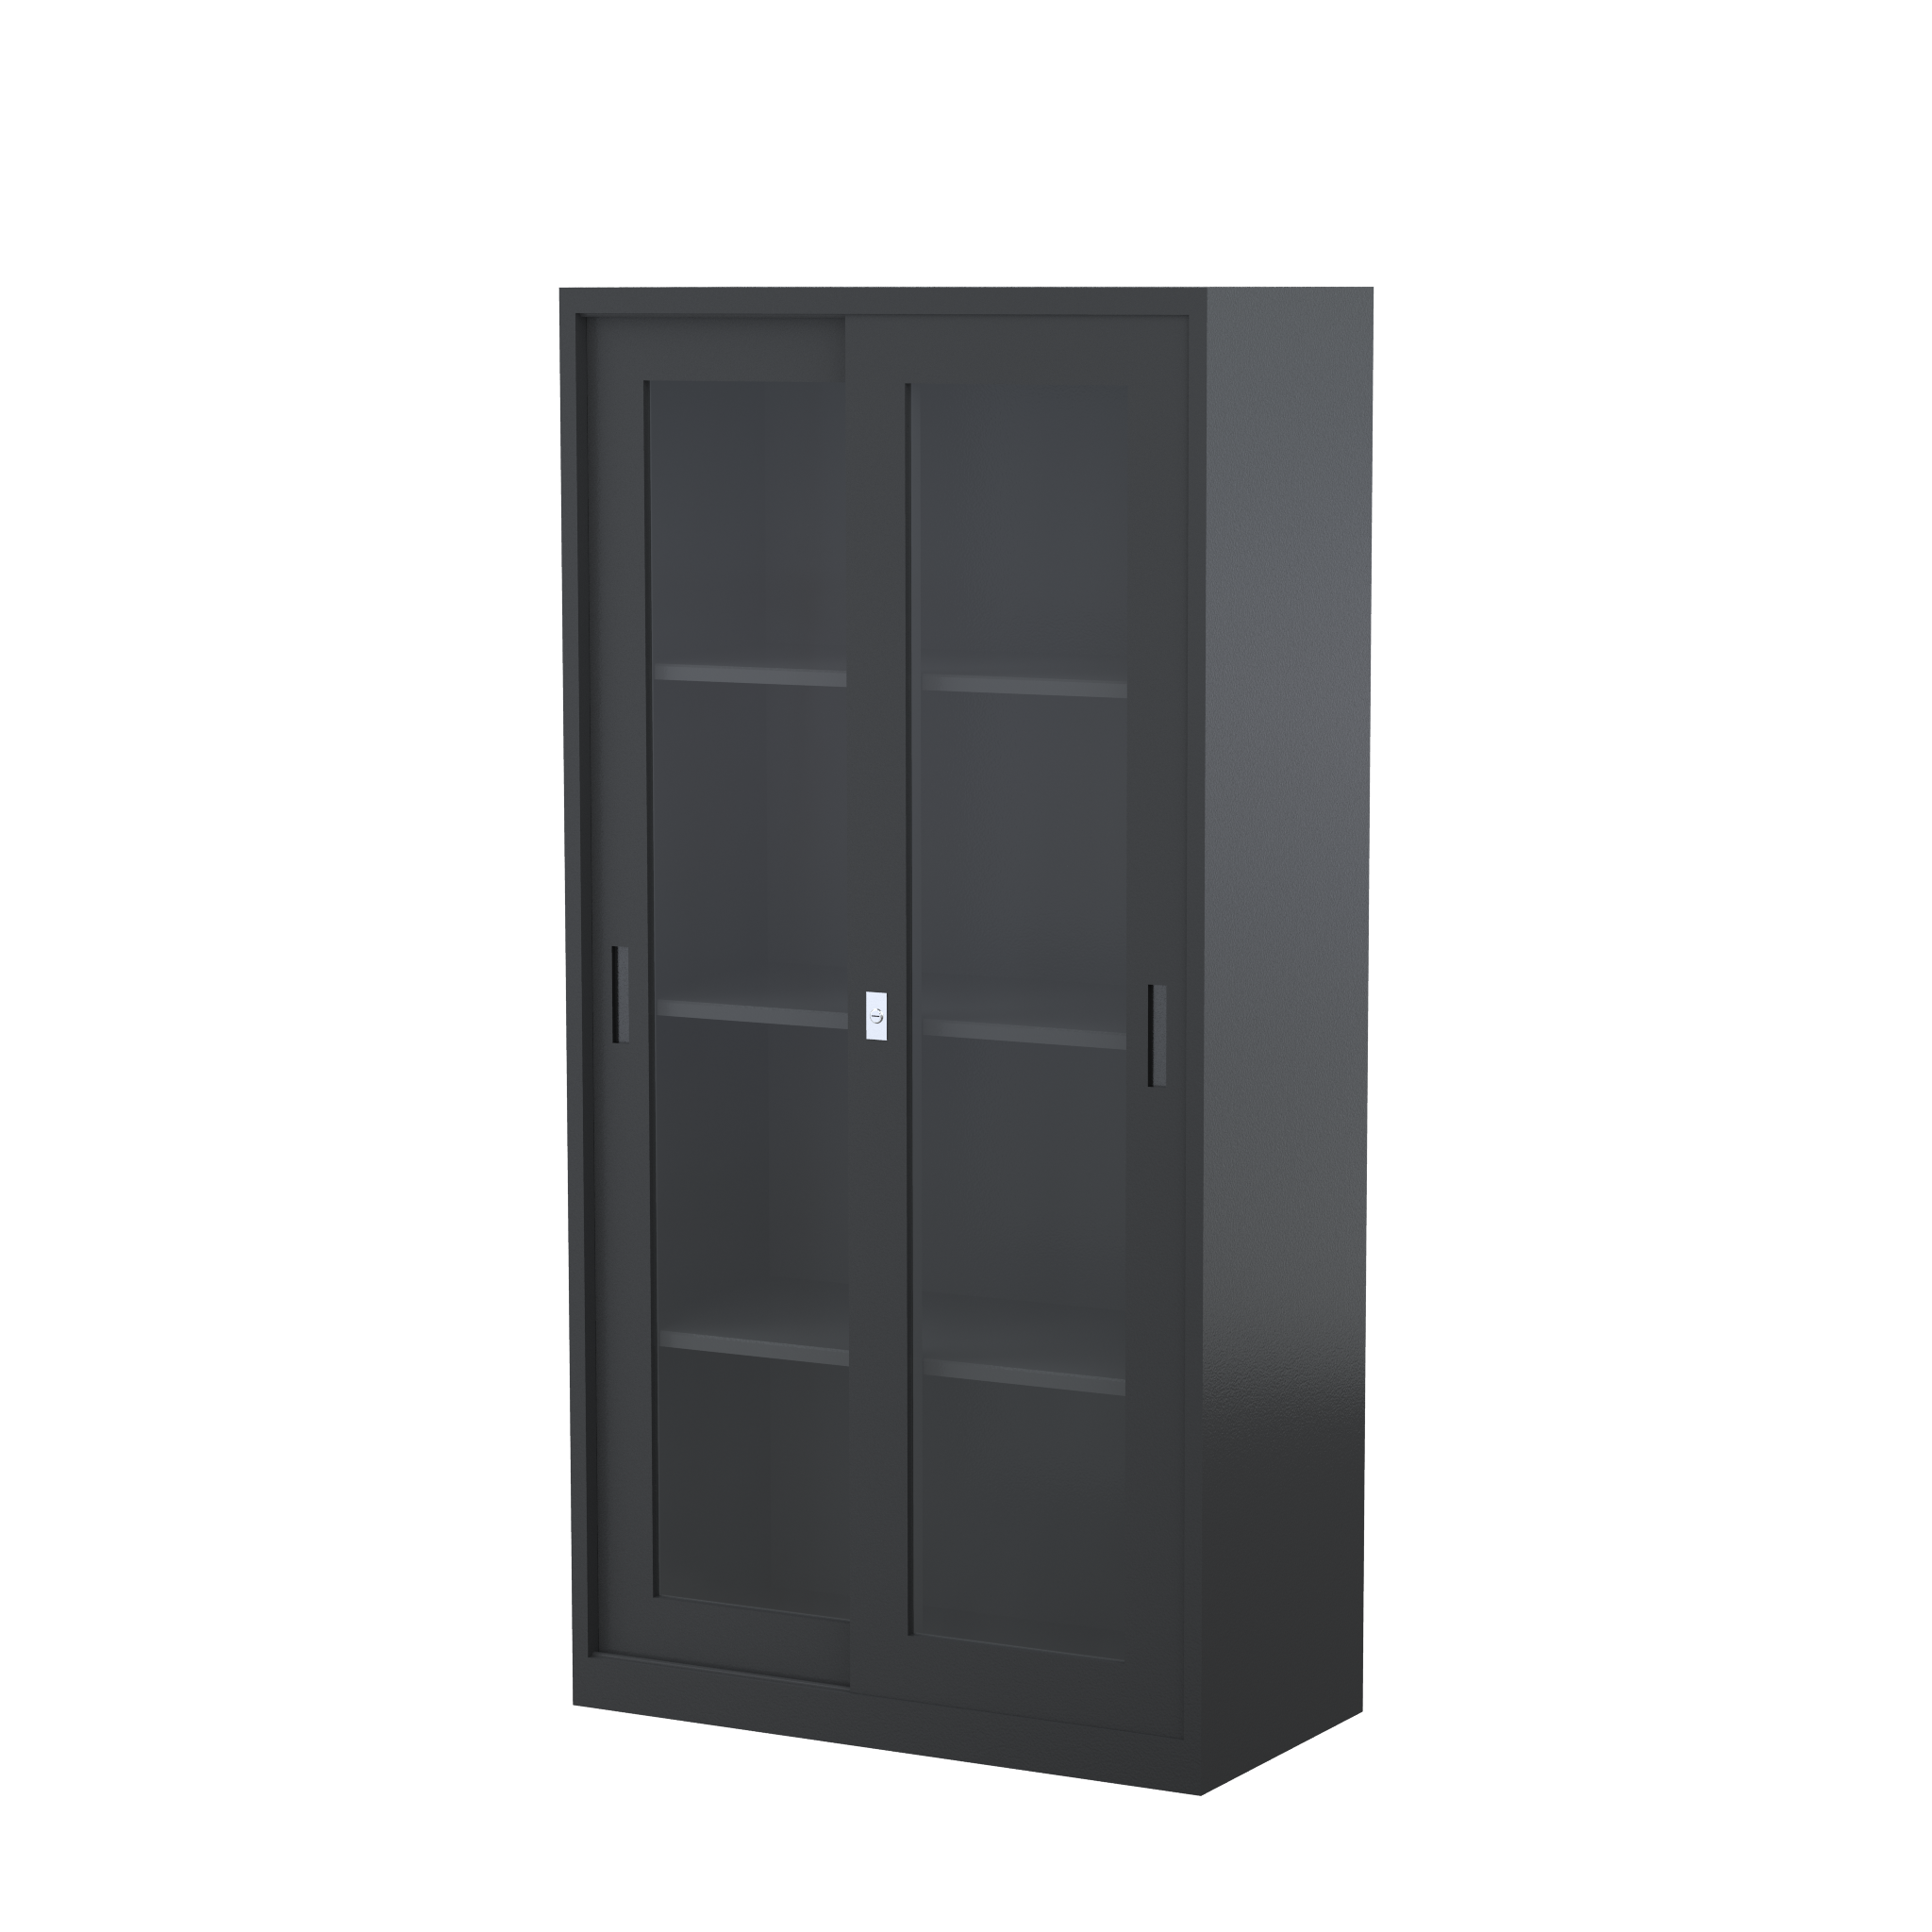 GD1830_914 - STEELCO SG Cabinet 1830H x 914W x 465D - 3 Shelves-GR.png